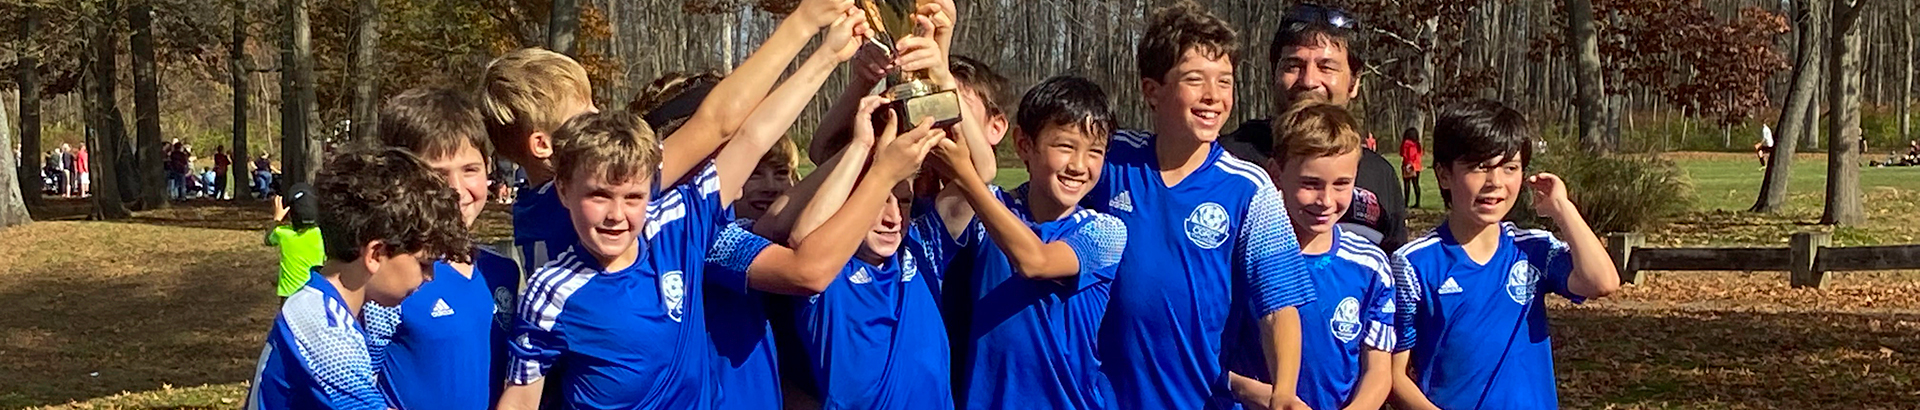 Champions Crowned at Fall Connecticut Cup